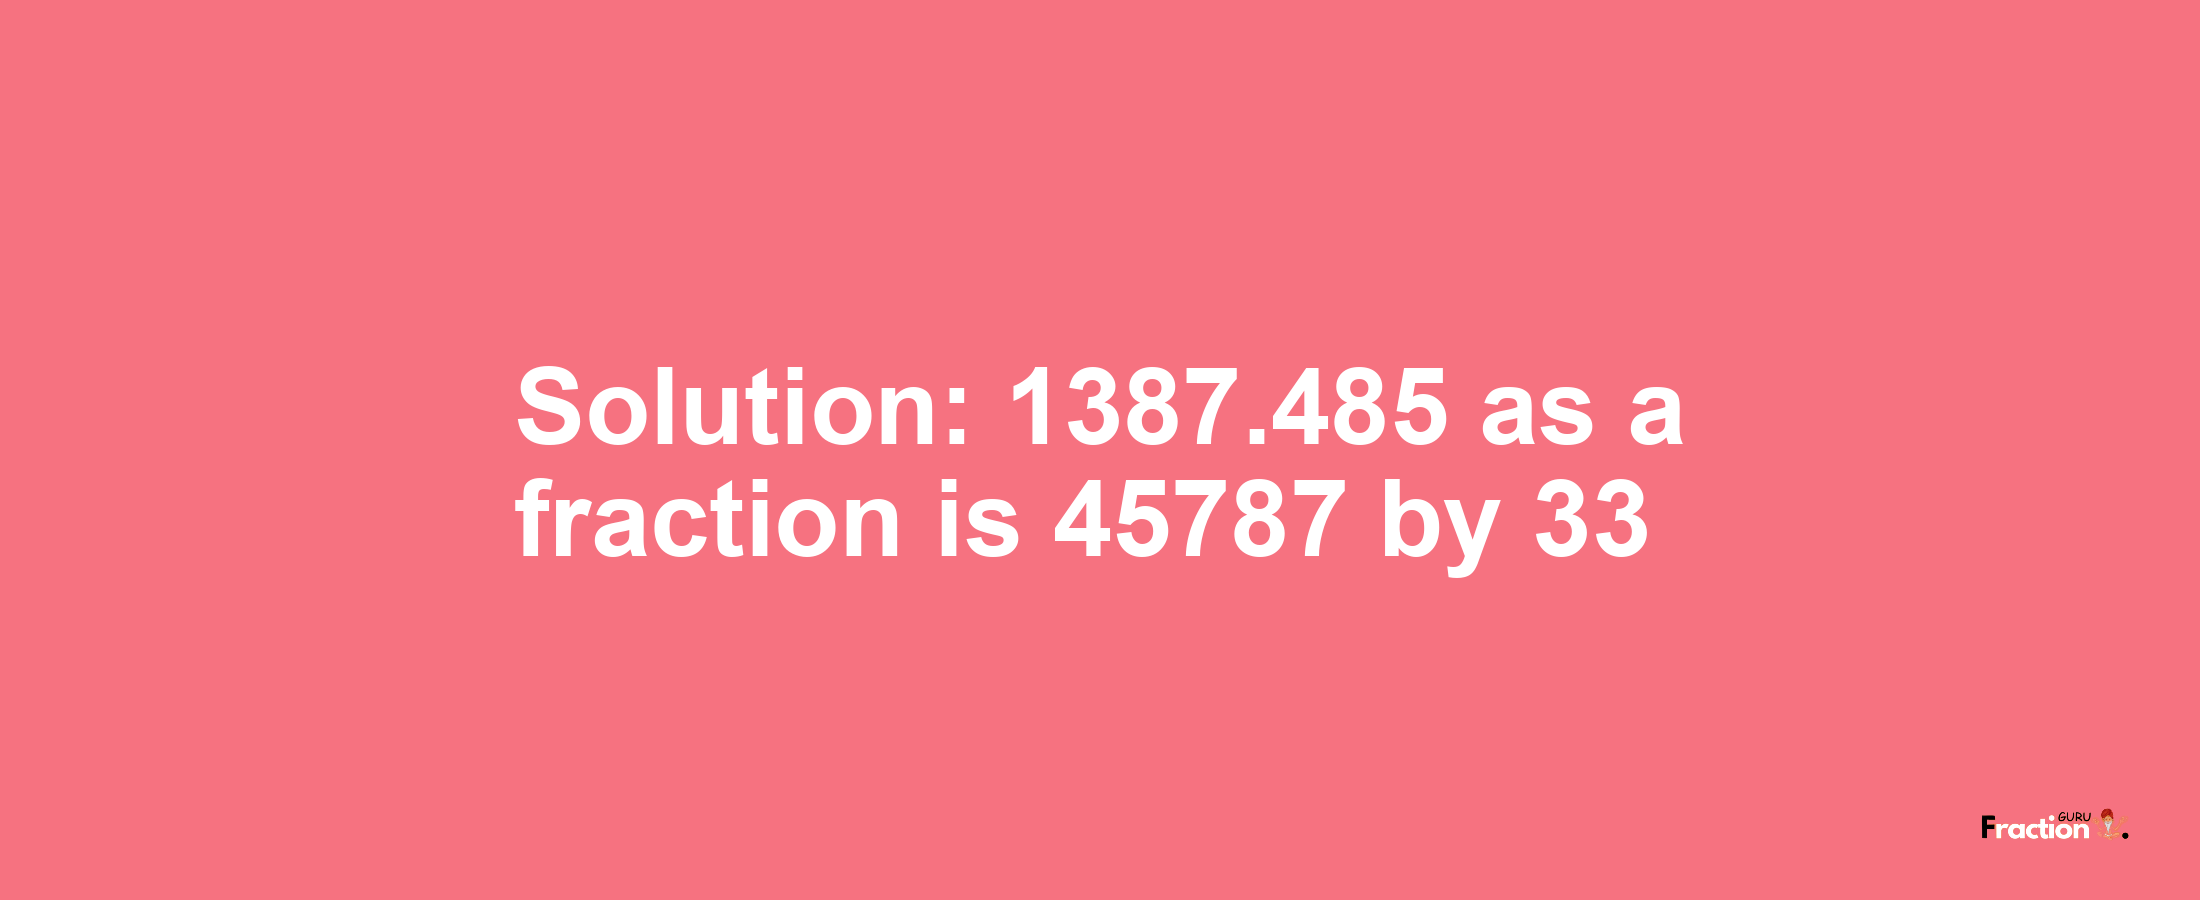 Solution:1387.485 as a fraction is 45787/33